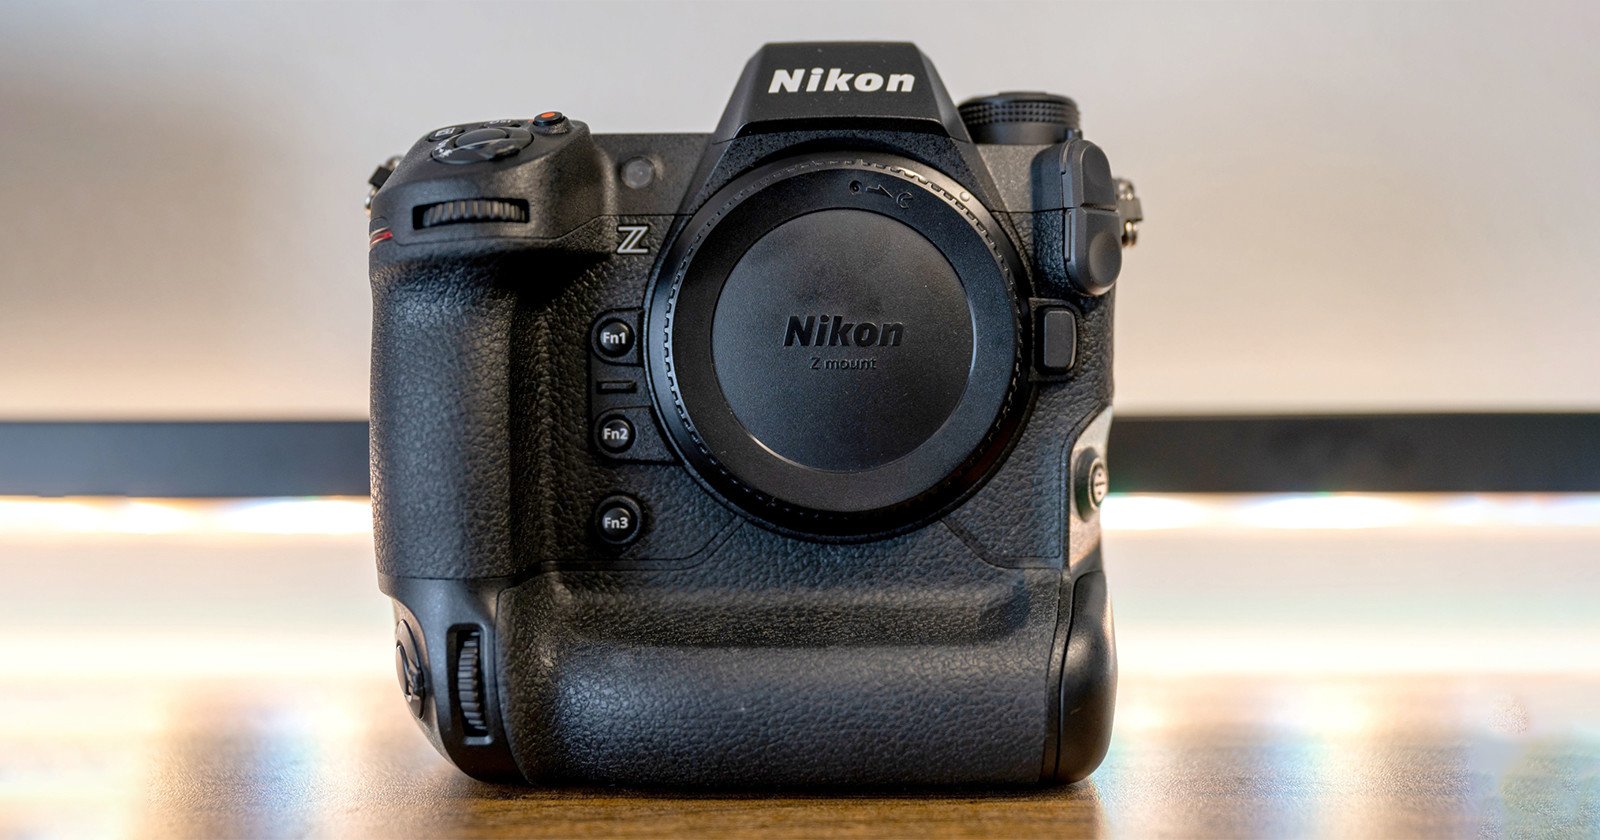  nikon firmware update adds nearly features 